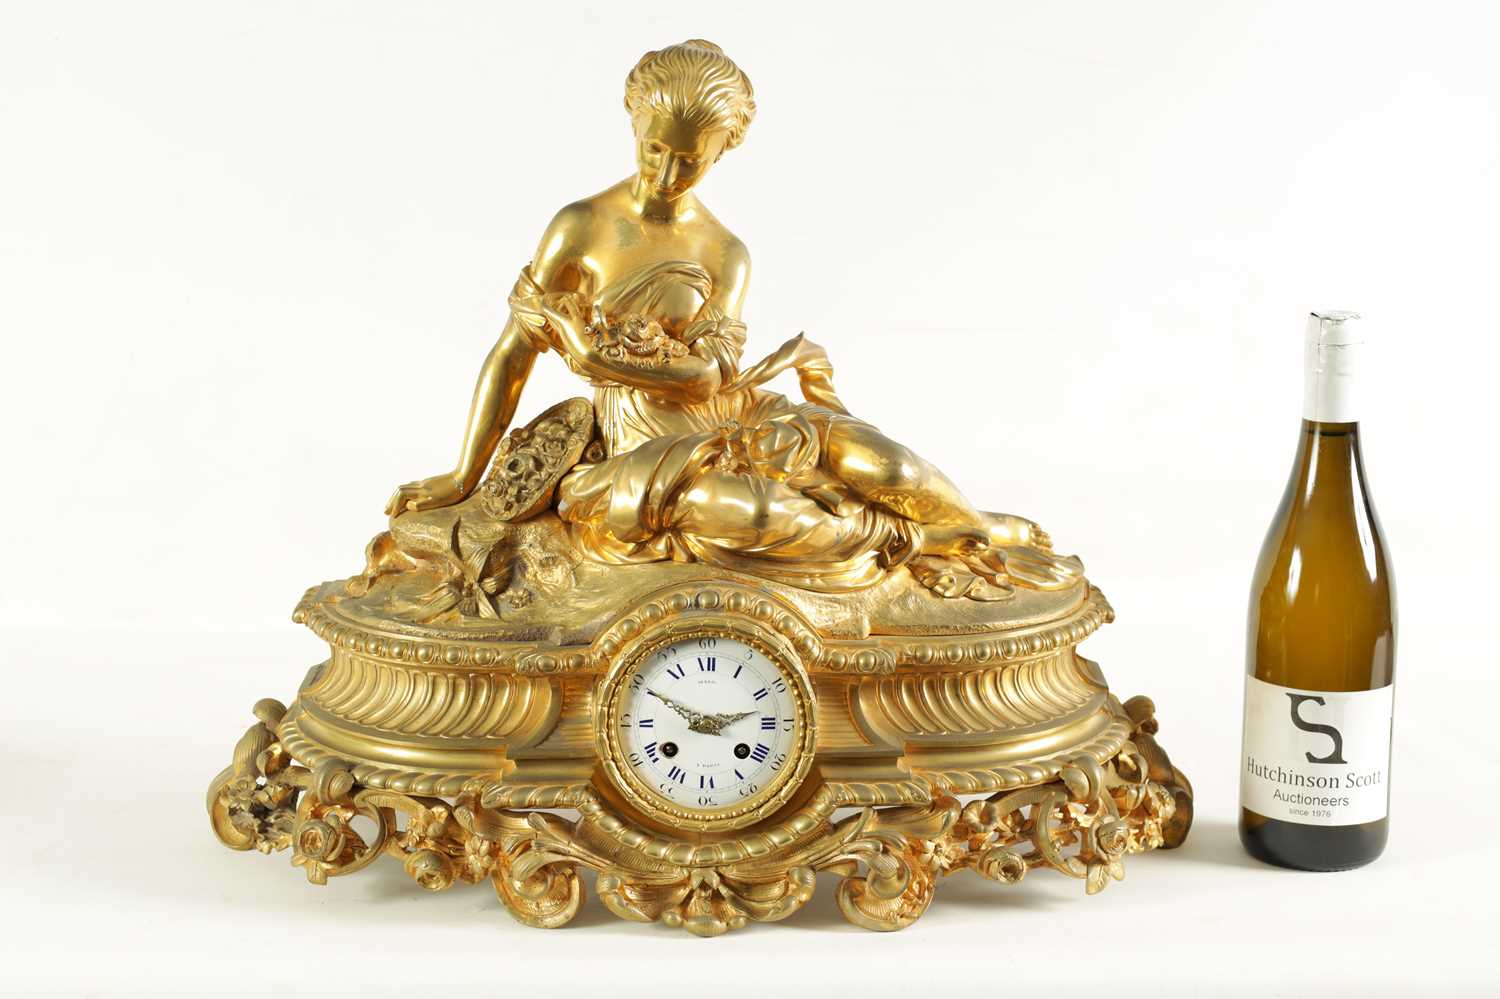 A LARGE 19TH CENTURY FRENCH FIGURAL ORMOLU MANTEL CLOCK - Image 6 of 11